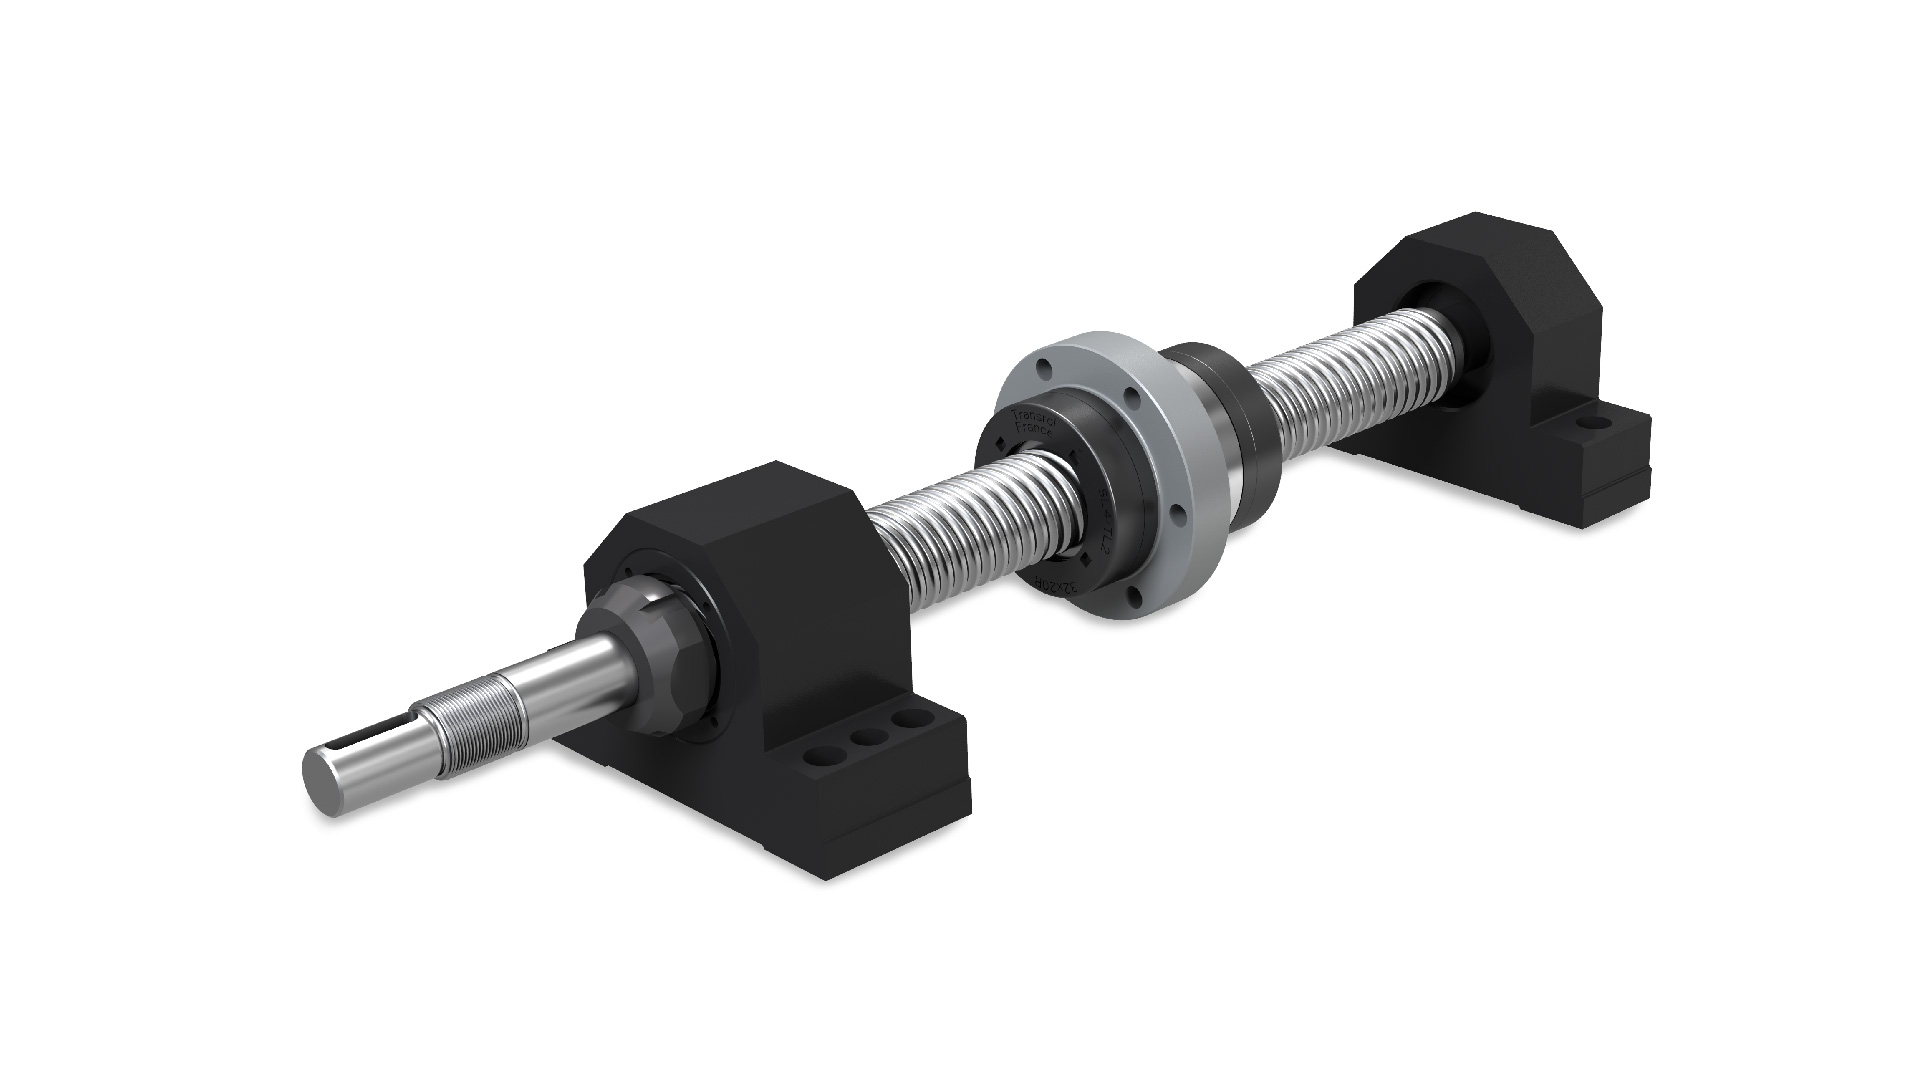 Support bearings for ball screws